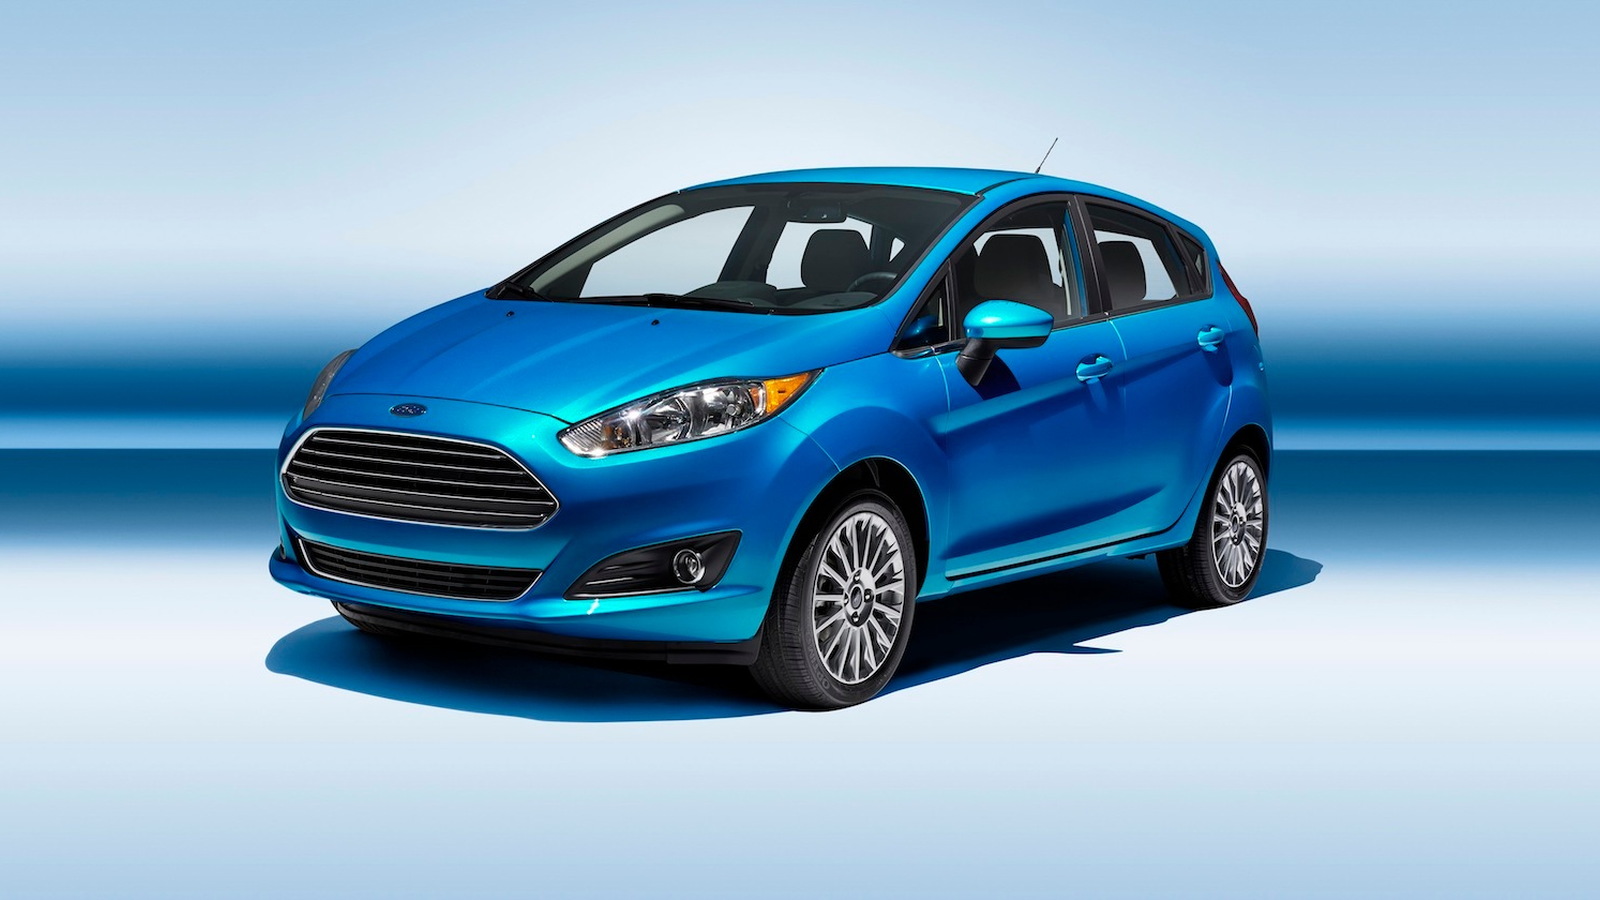 2014 Ford Fiesta Updates Styling Interior Myfordtouch And Ecoboost